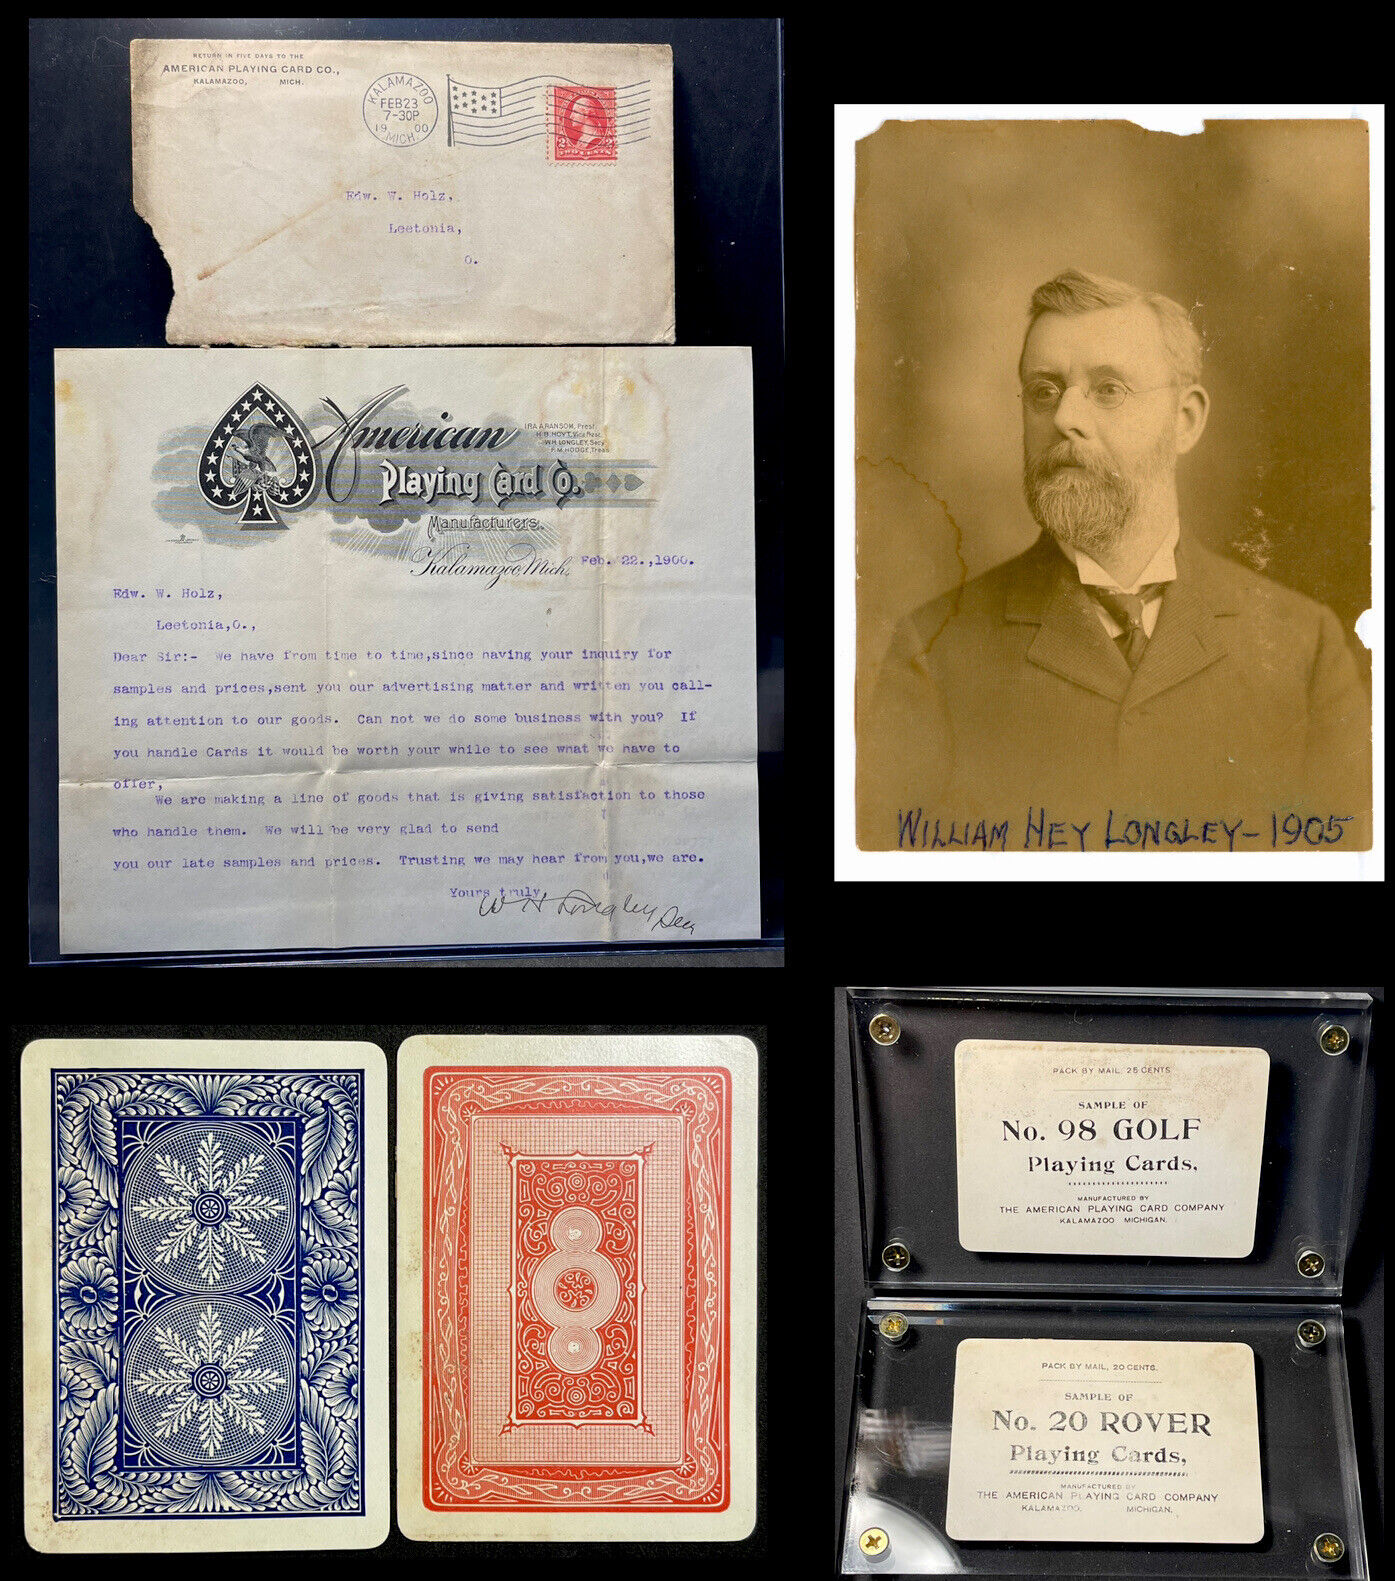 Historic Longley Signed Letter + Salesman Samples by American Playing Cards Co.